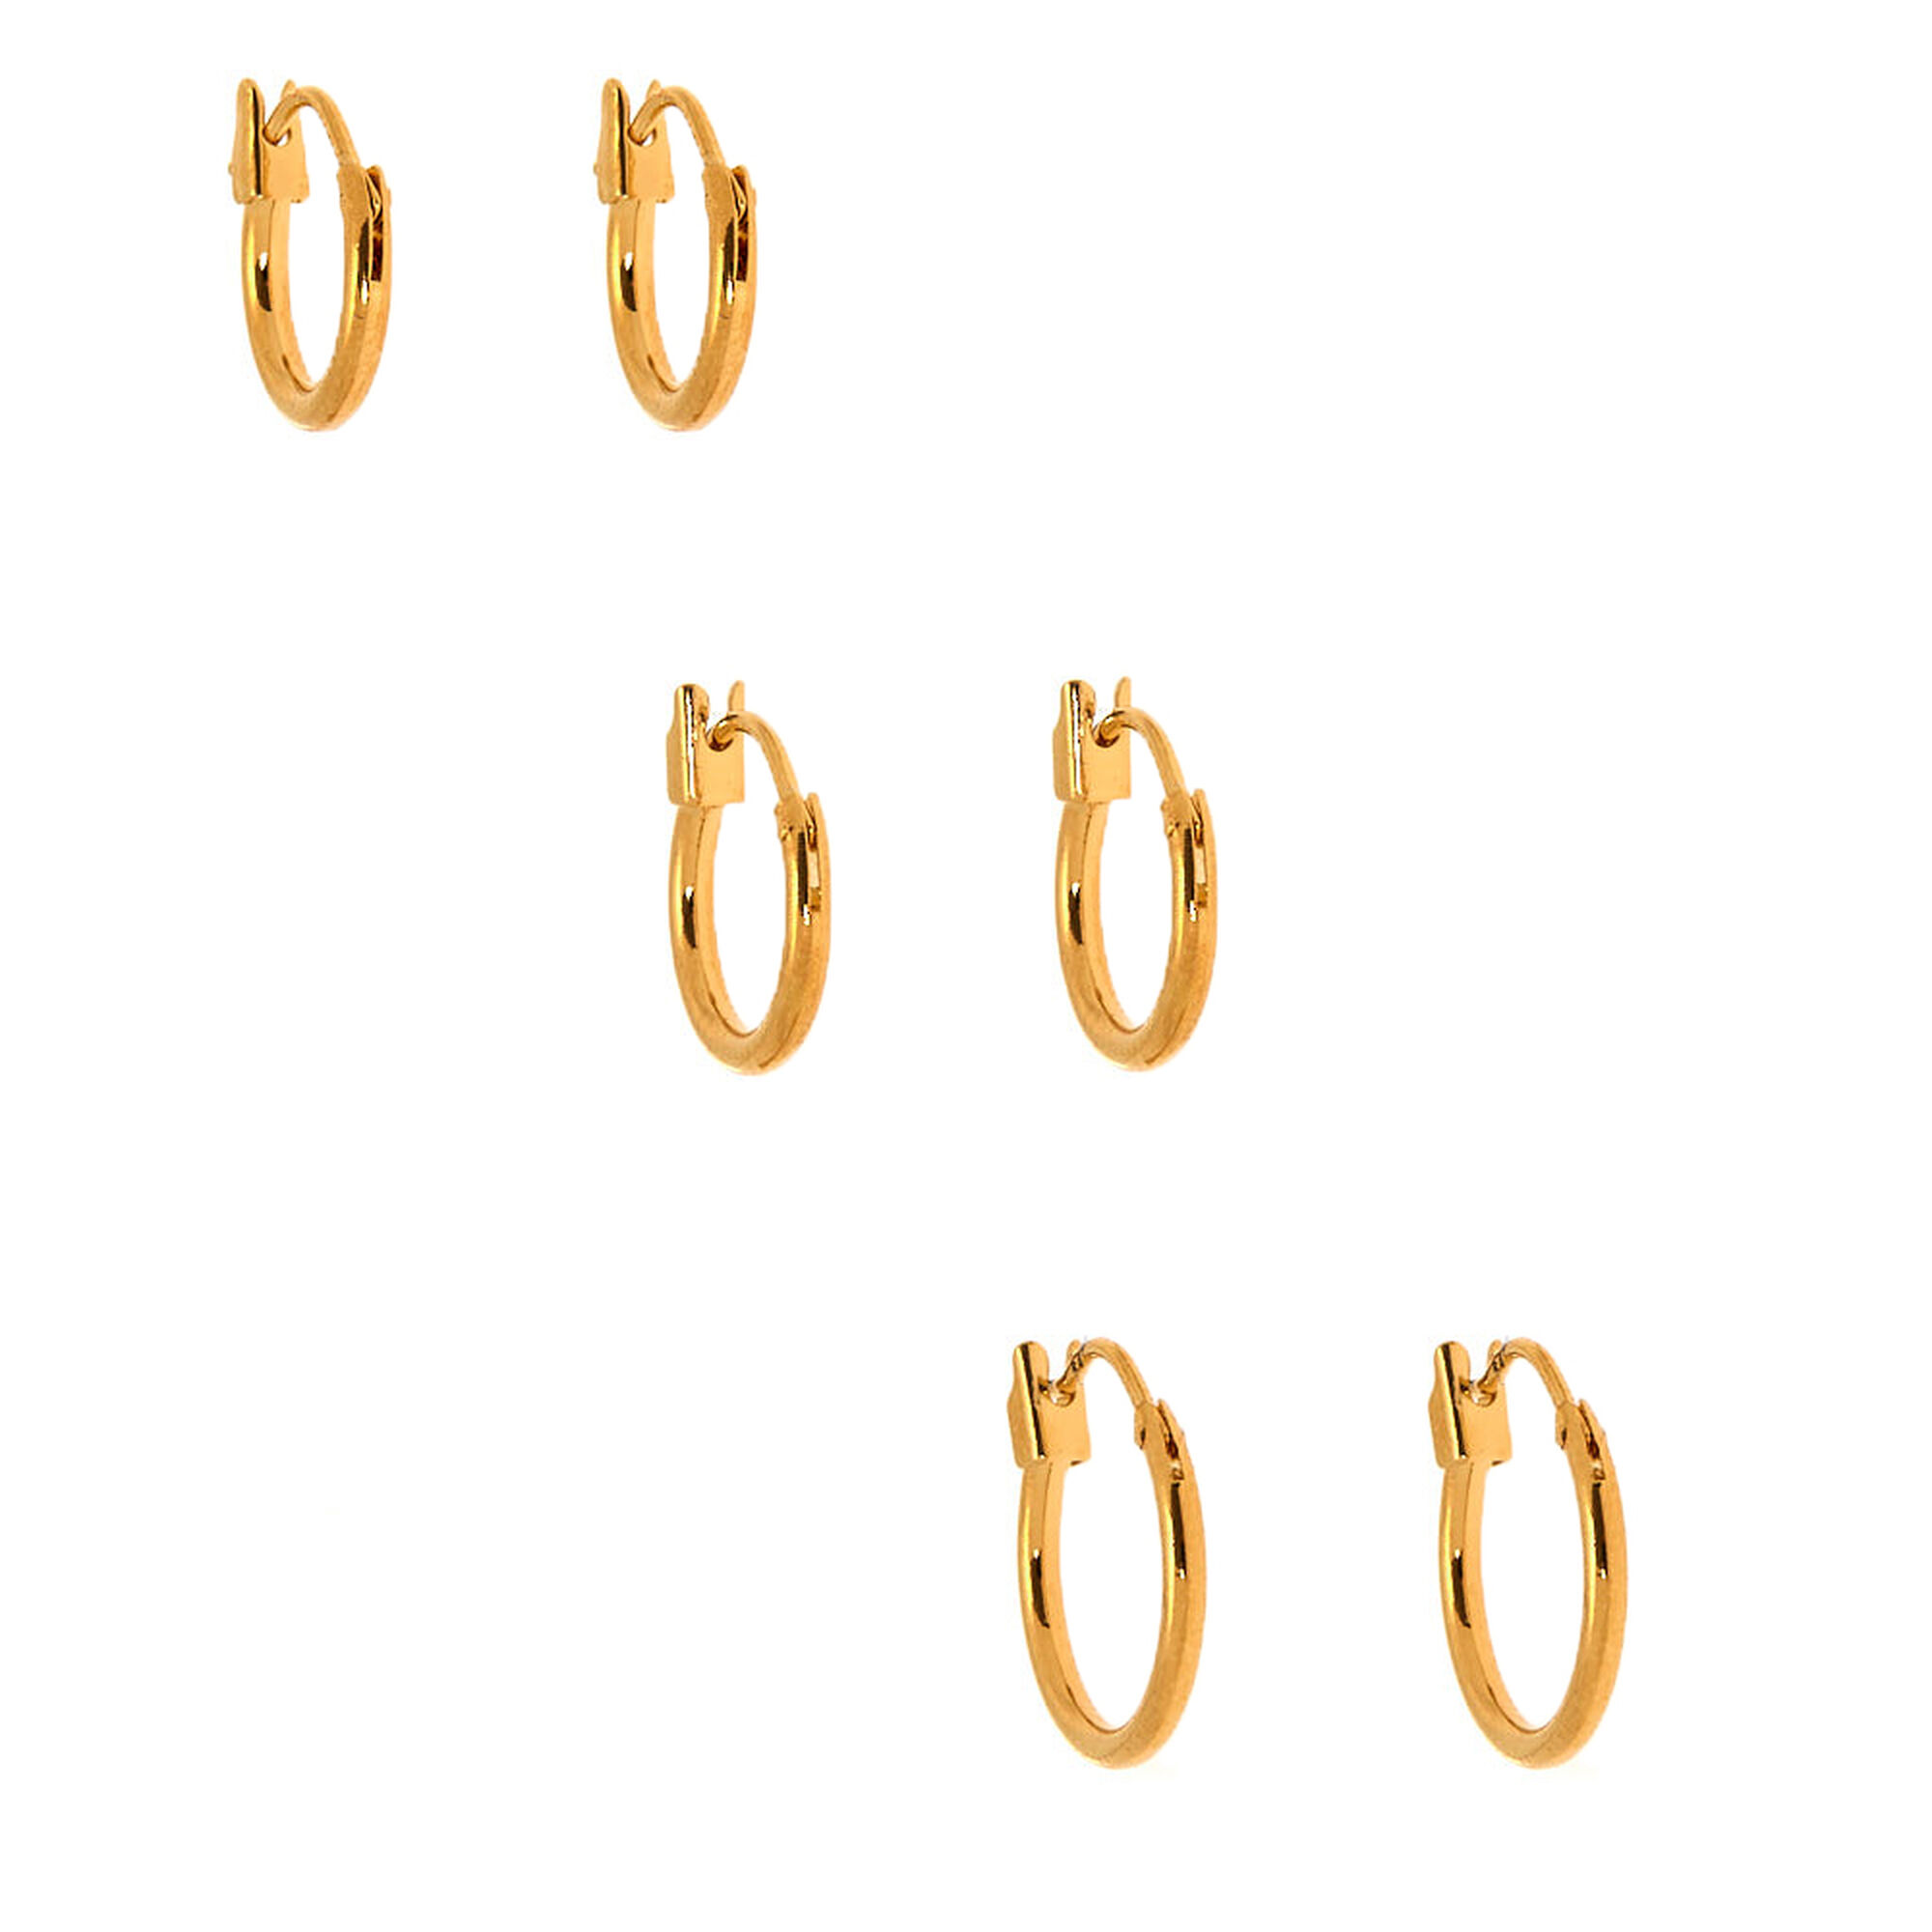 View Claires 18Ct Plated Hinged Hoop Earrings 3 Pack Gold information